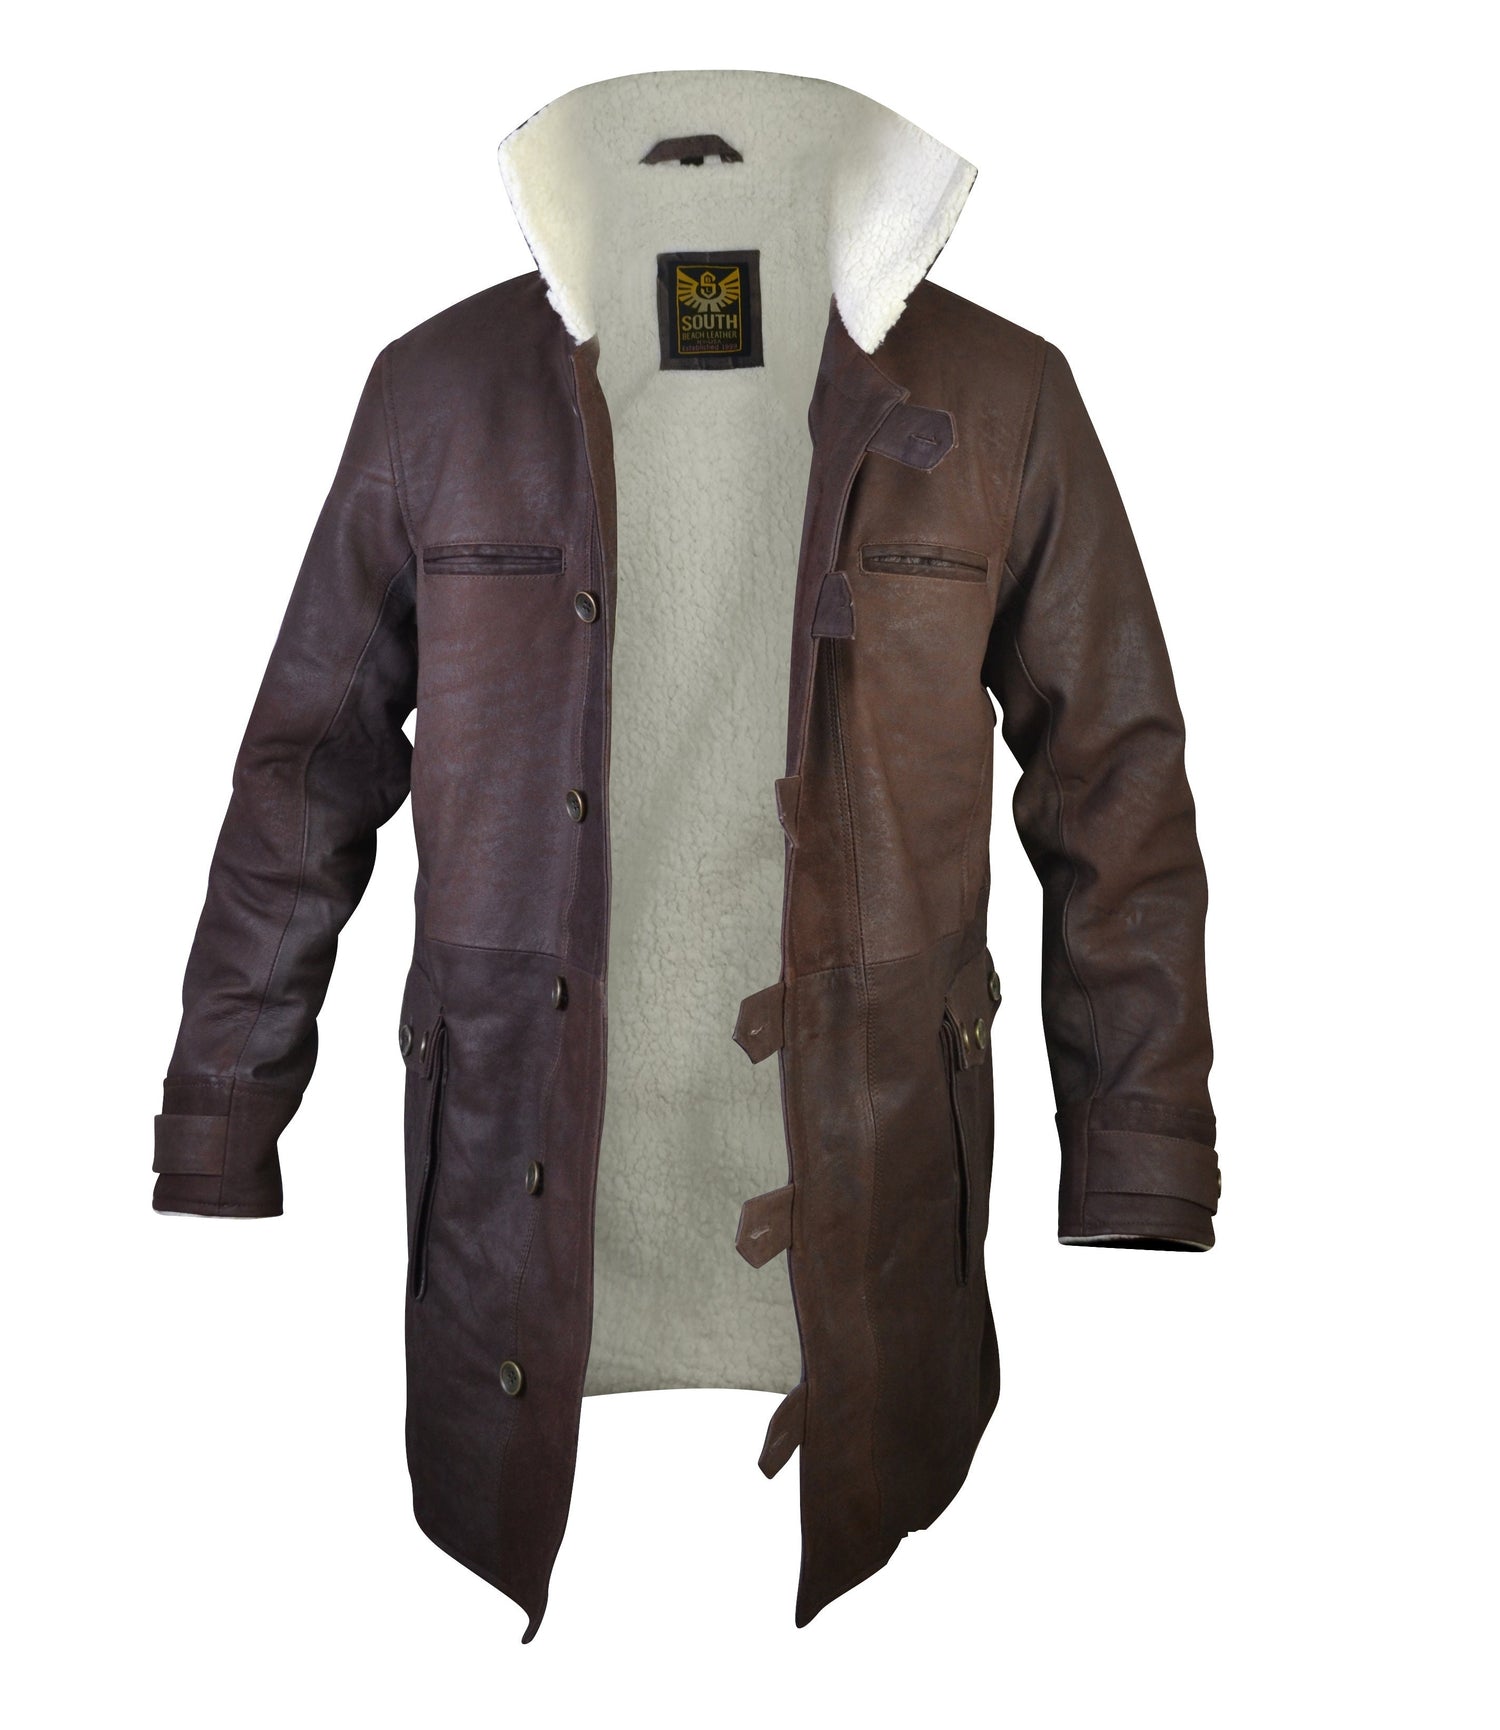 SBL South Beach Leather Men's Distressed Trench Leather Coat